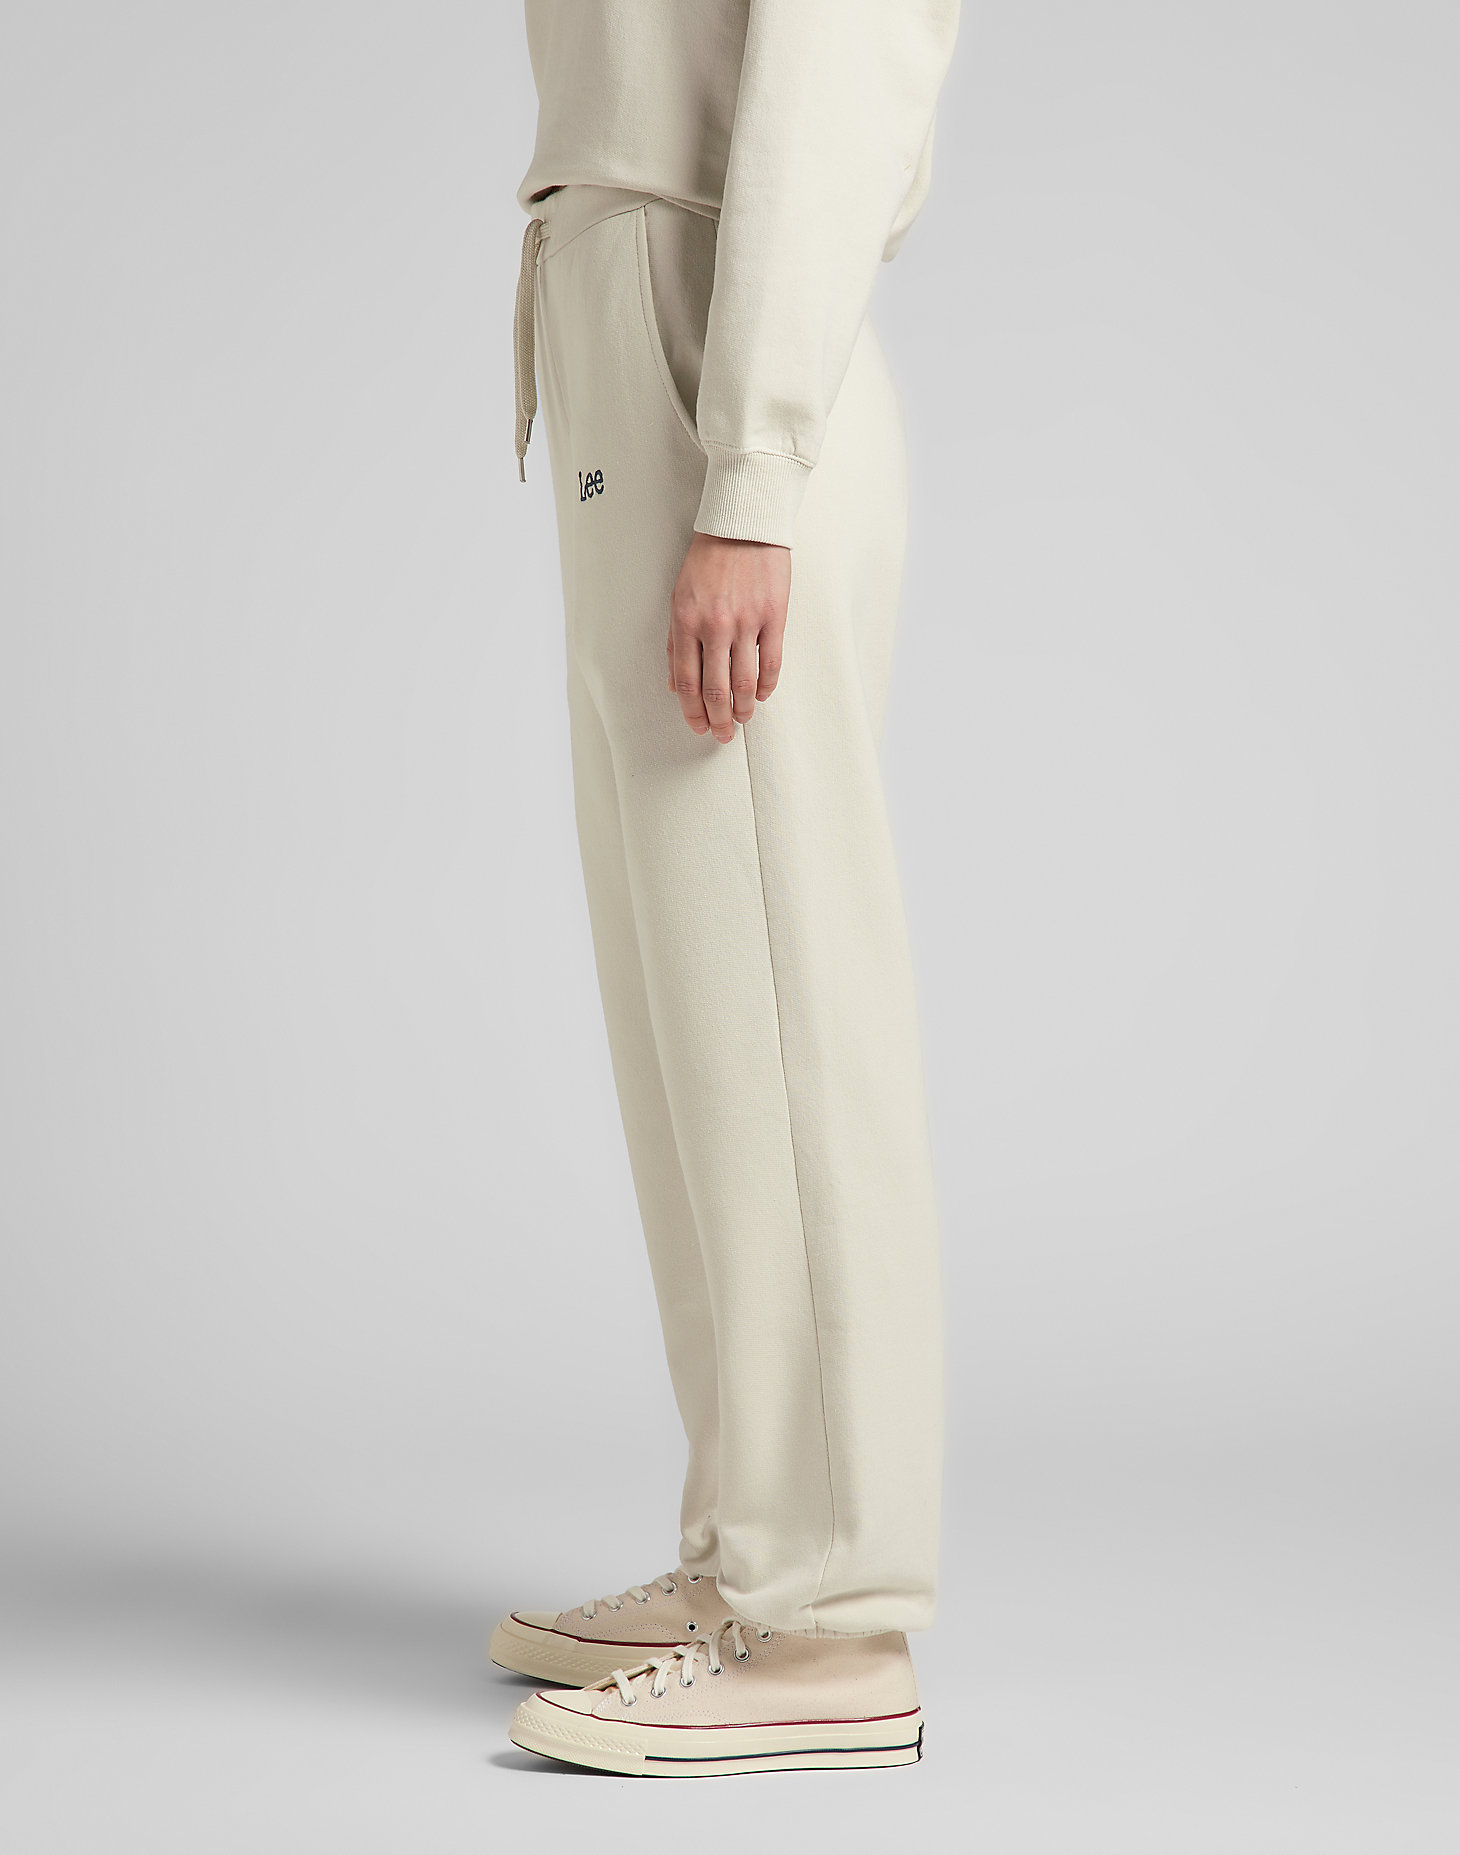 Relaxed Sweatpants in Workwear White alternative view 3